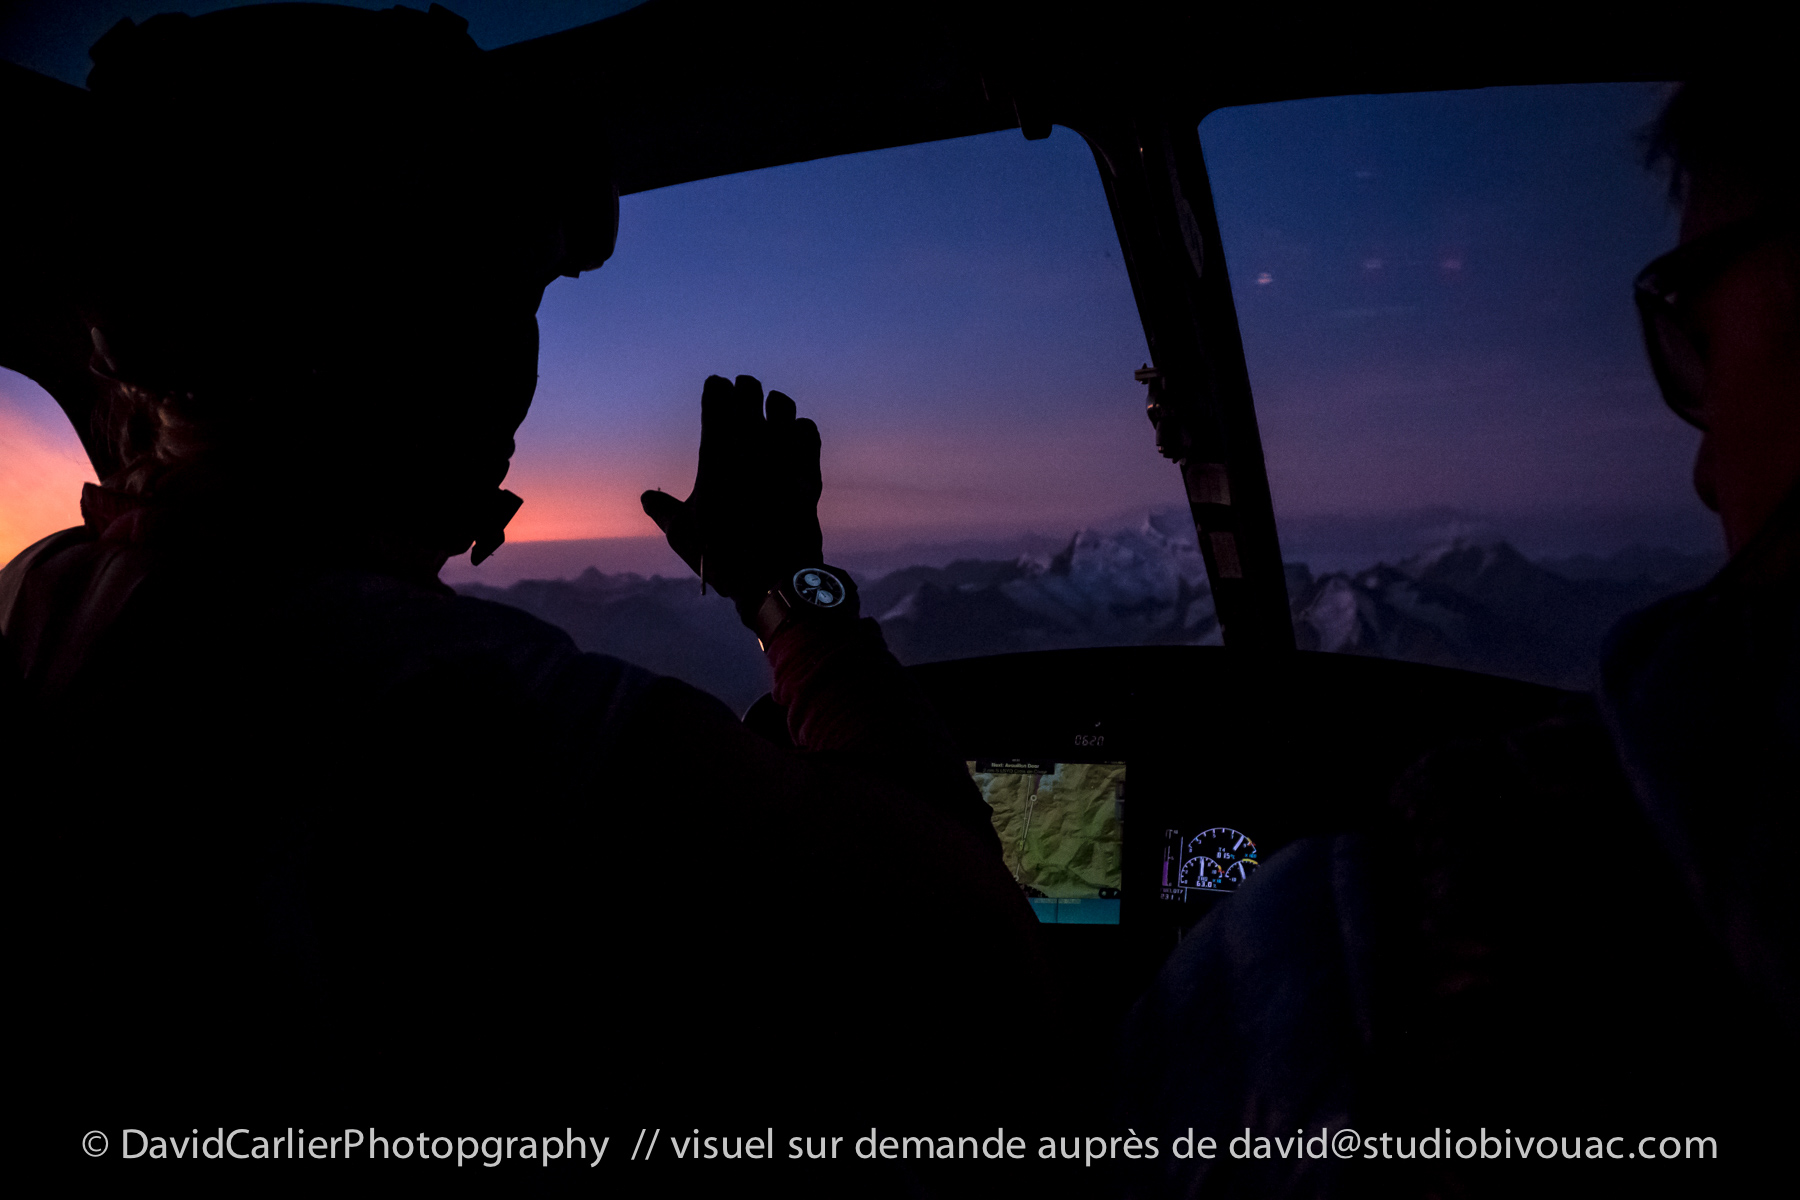 Géraldine Fasnacht on her way to her night flight on her wingsuit over the Alps - photo by David Carlier